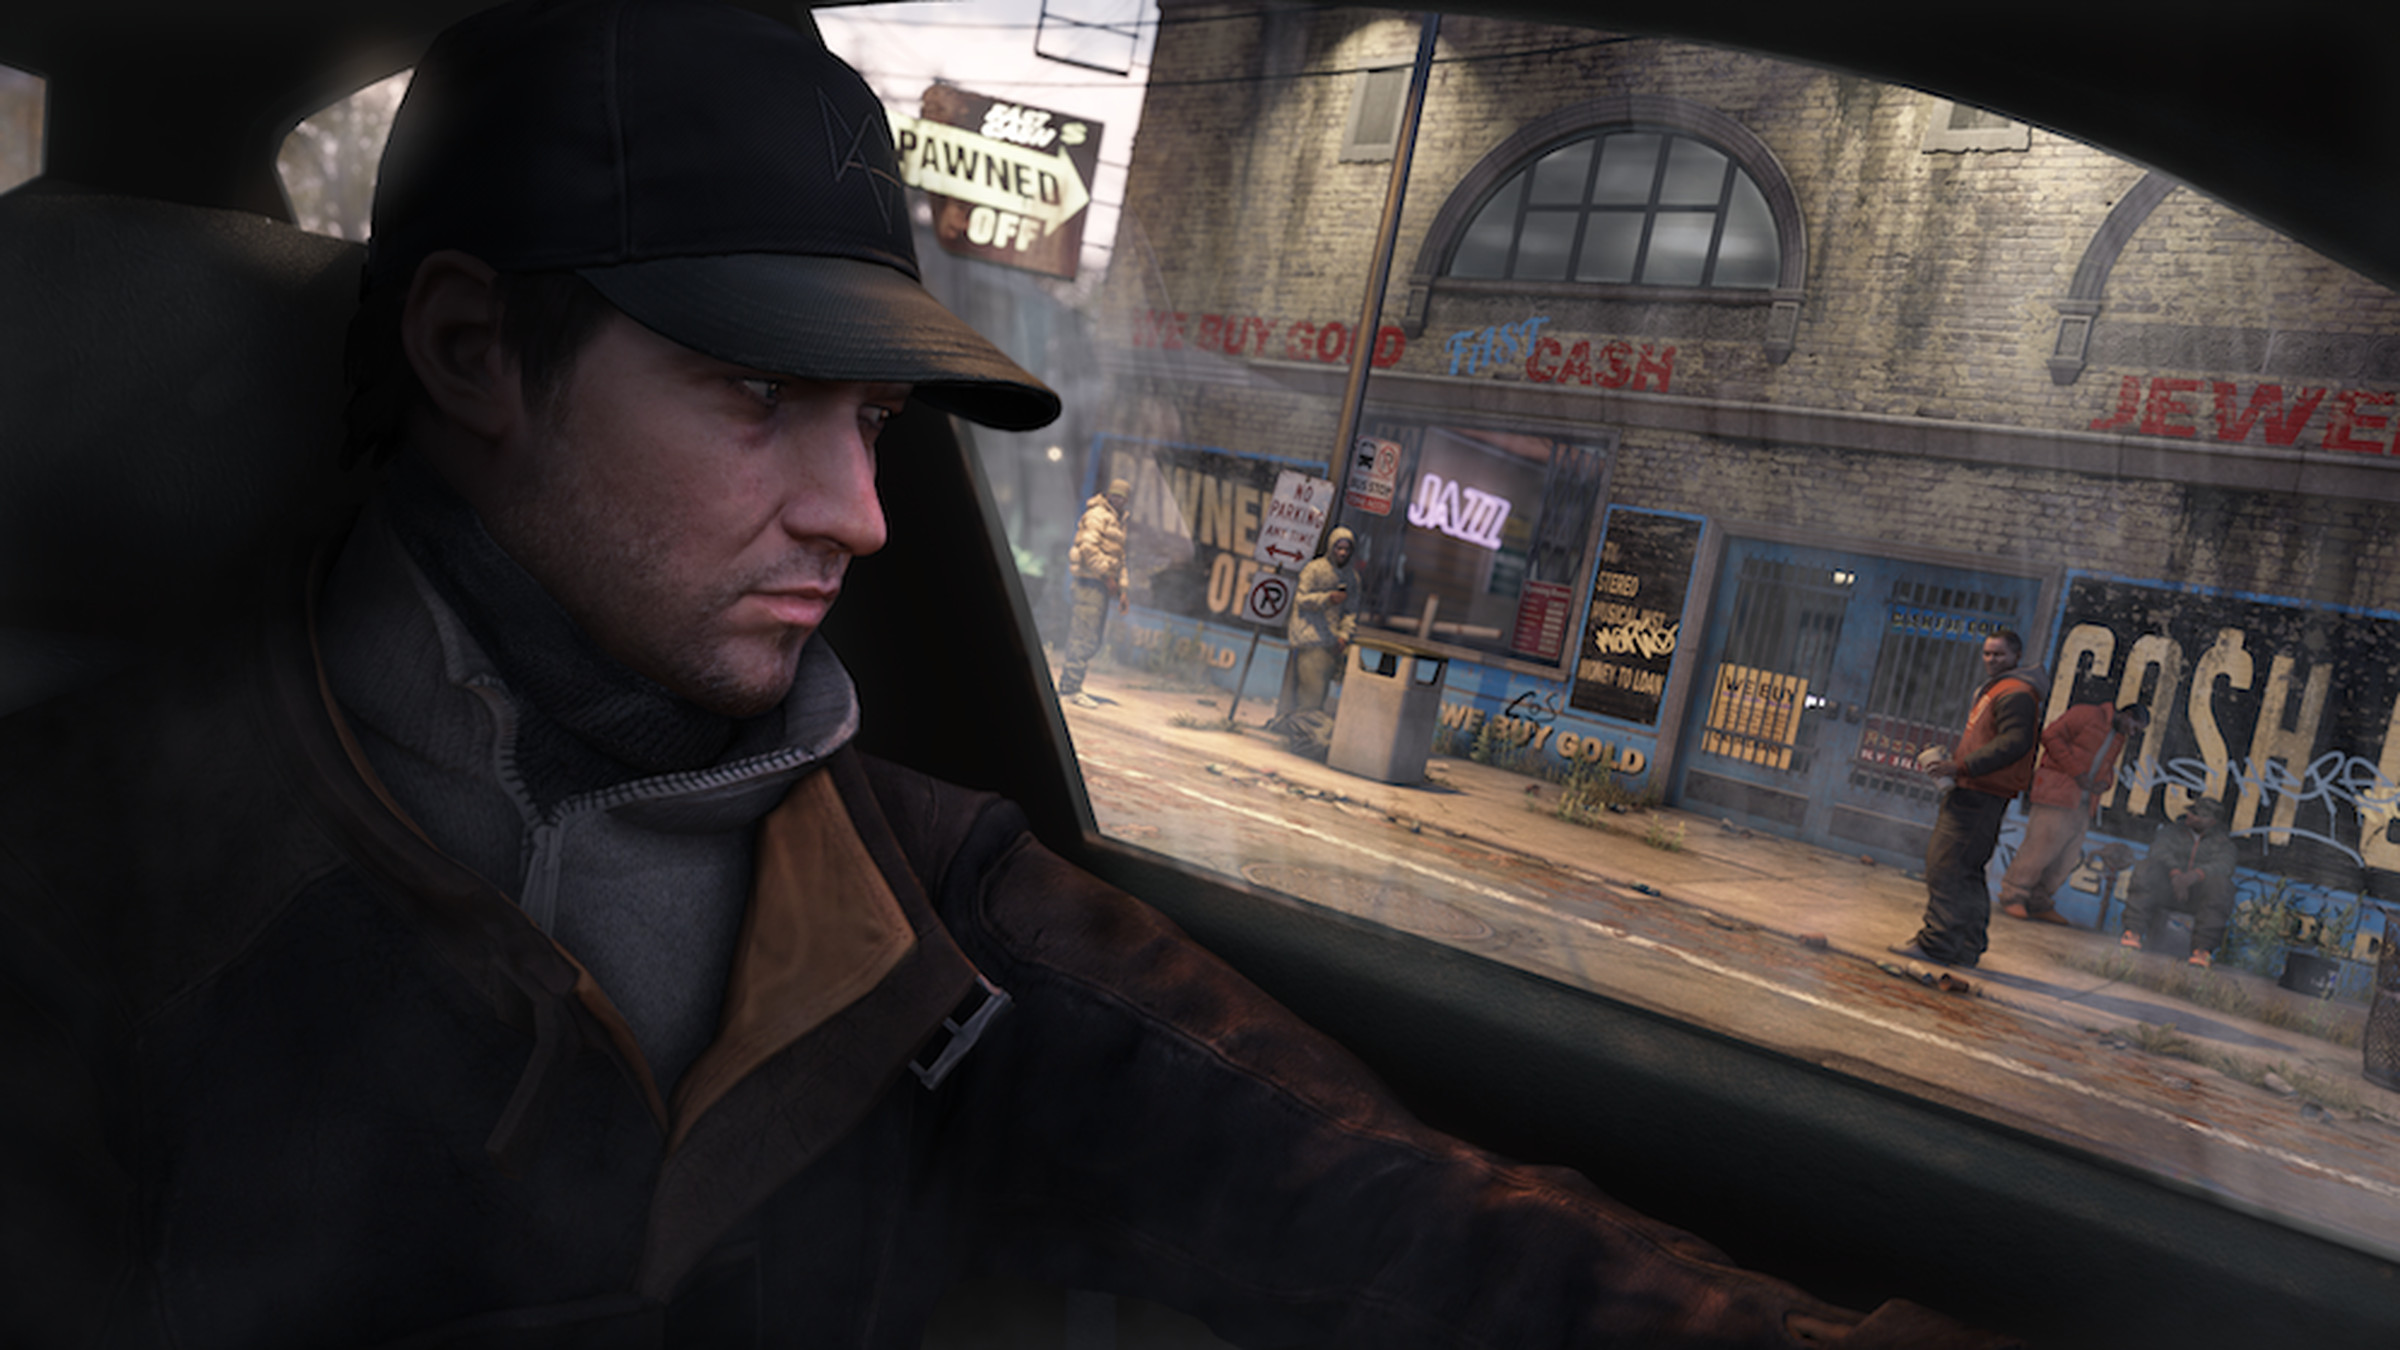 'Watch Dogs' at E3 2013